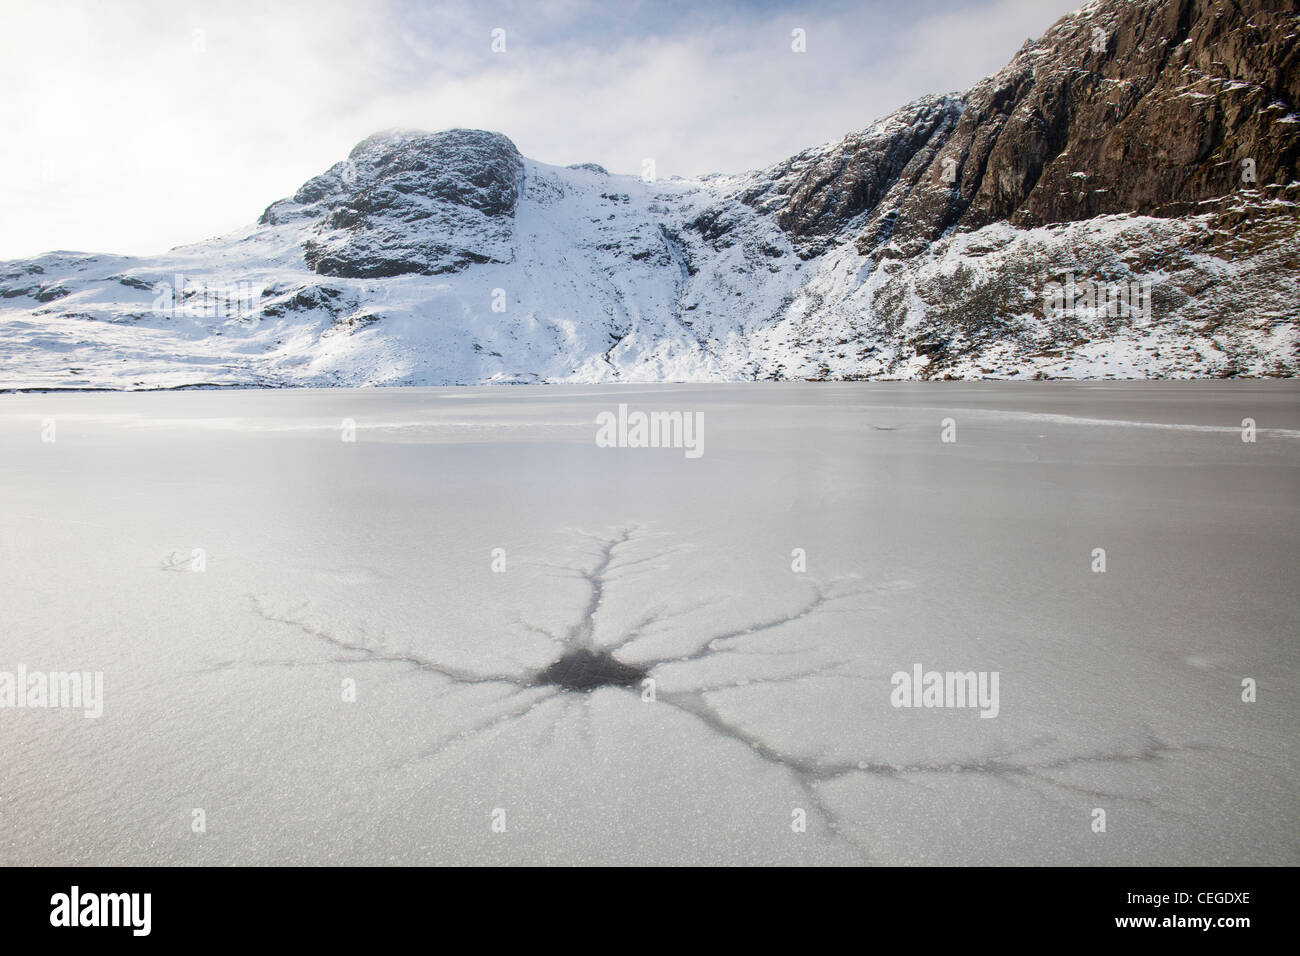 A frozen Stickle Tarn with crack patterns in the ice, above the Langdale valley in the Lake District, UK, Stock Photo